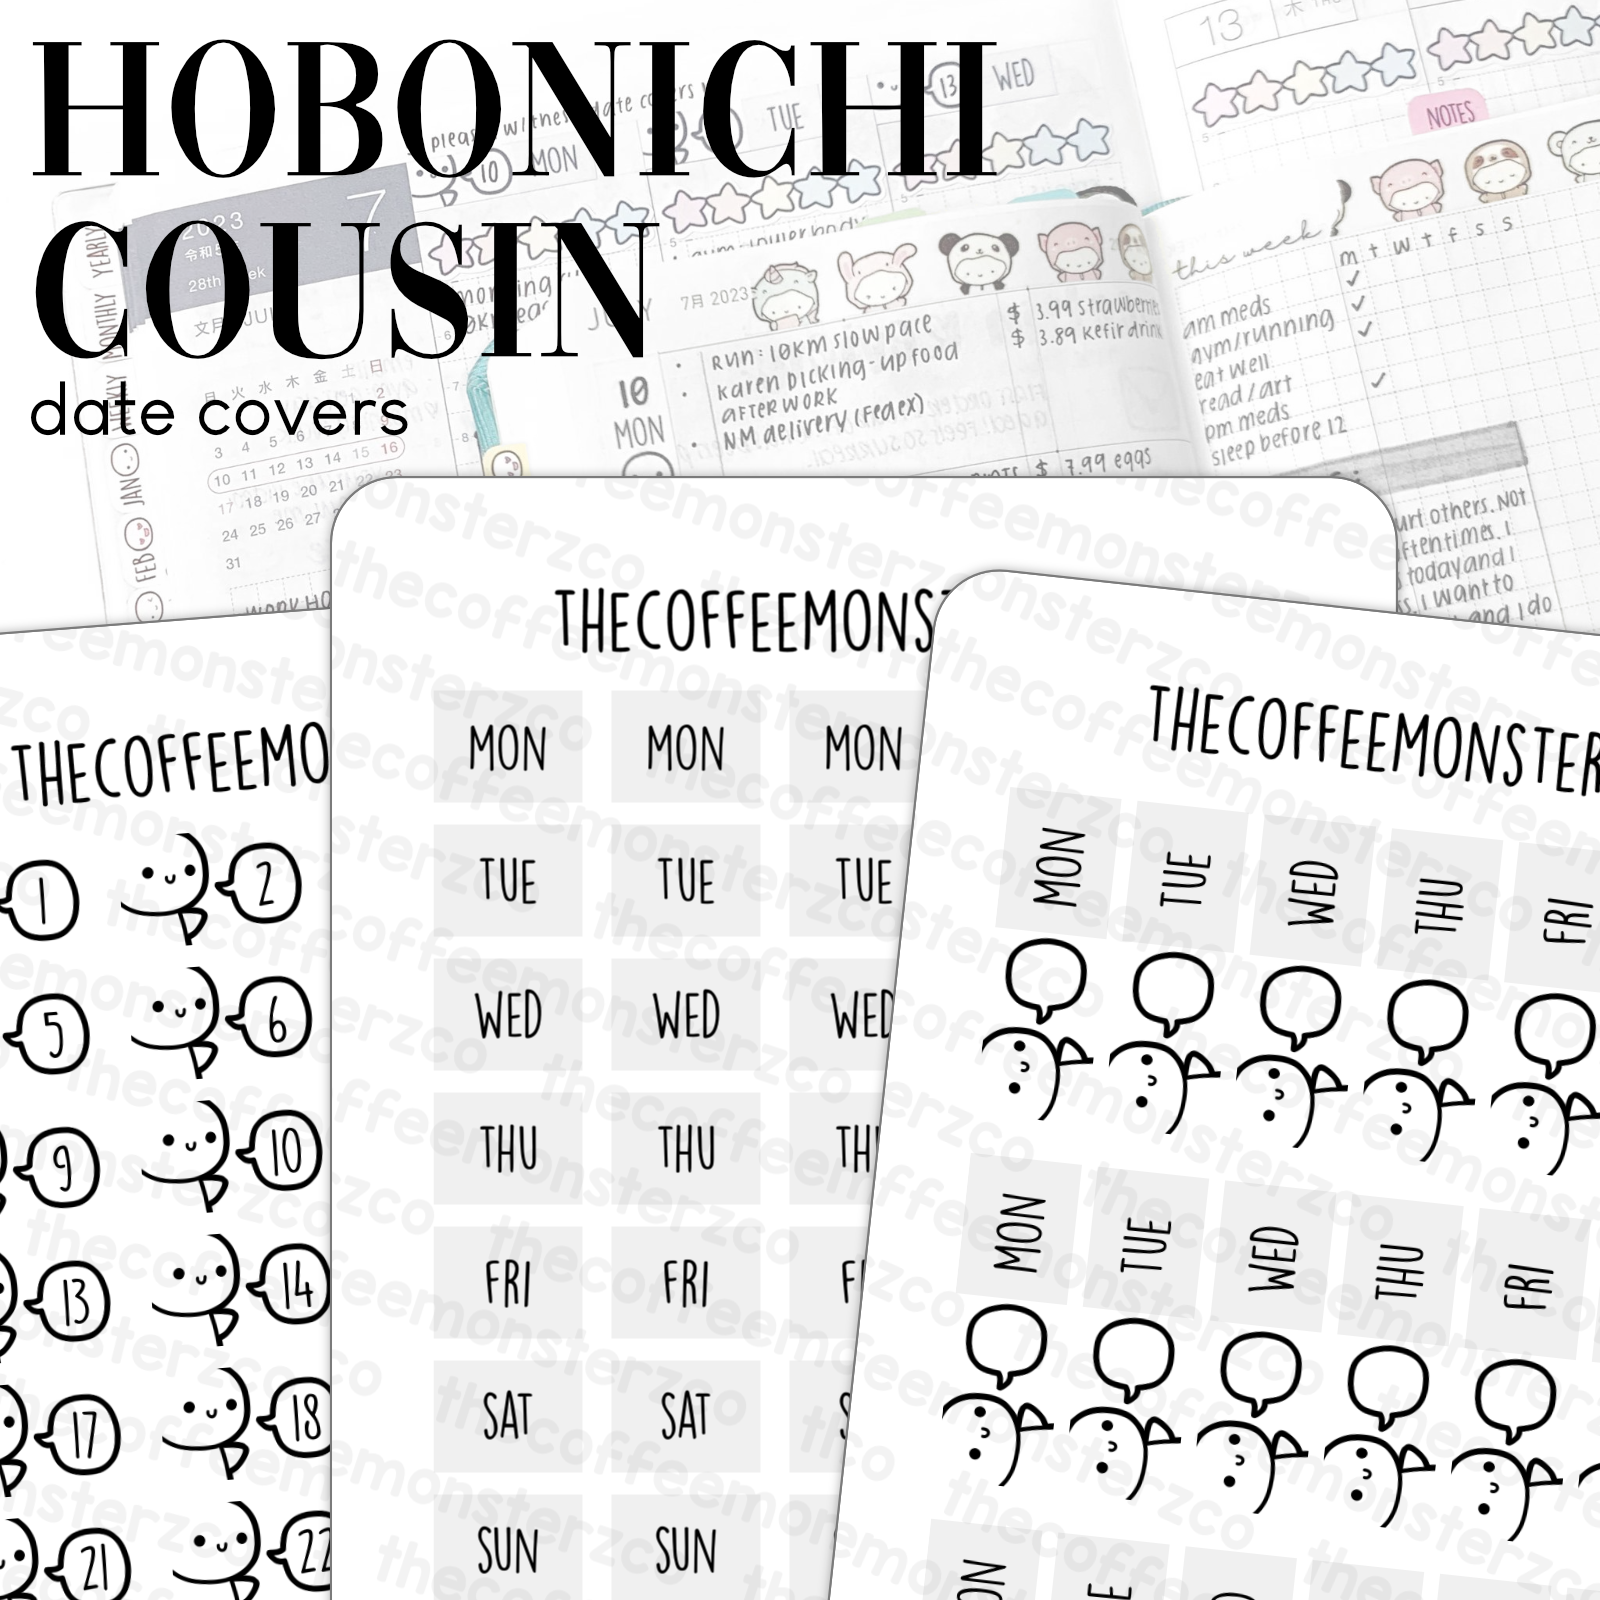 Hobonichi Cousin Date Covers